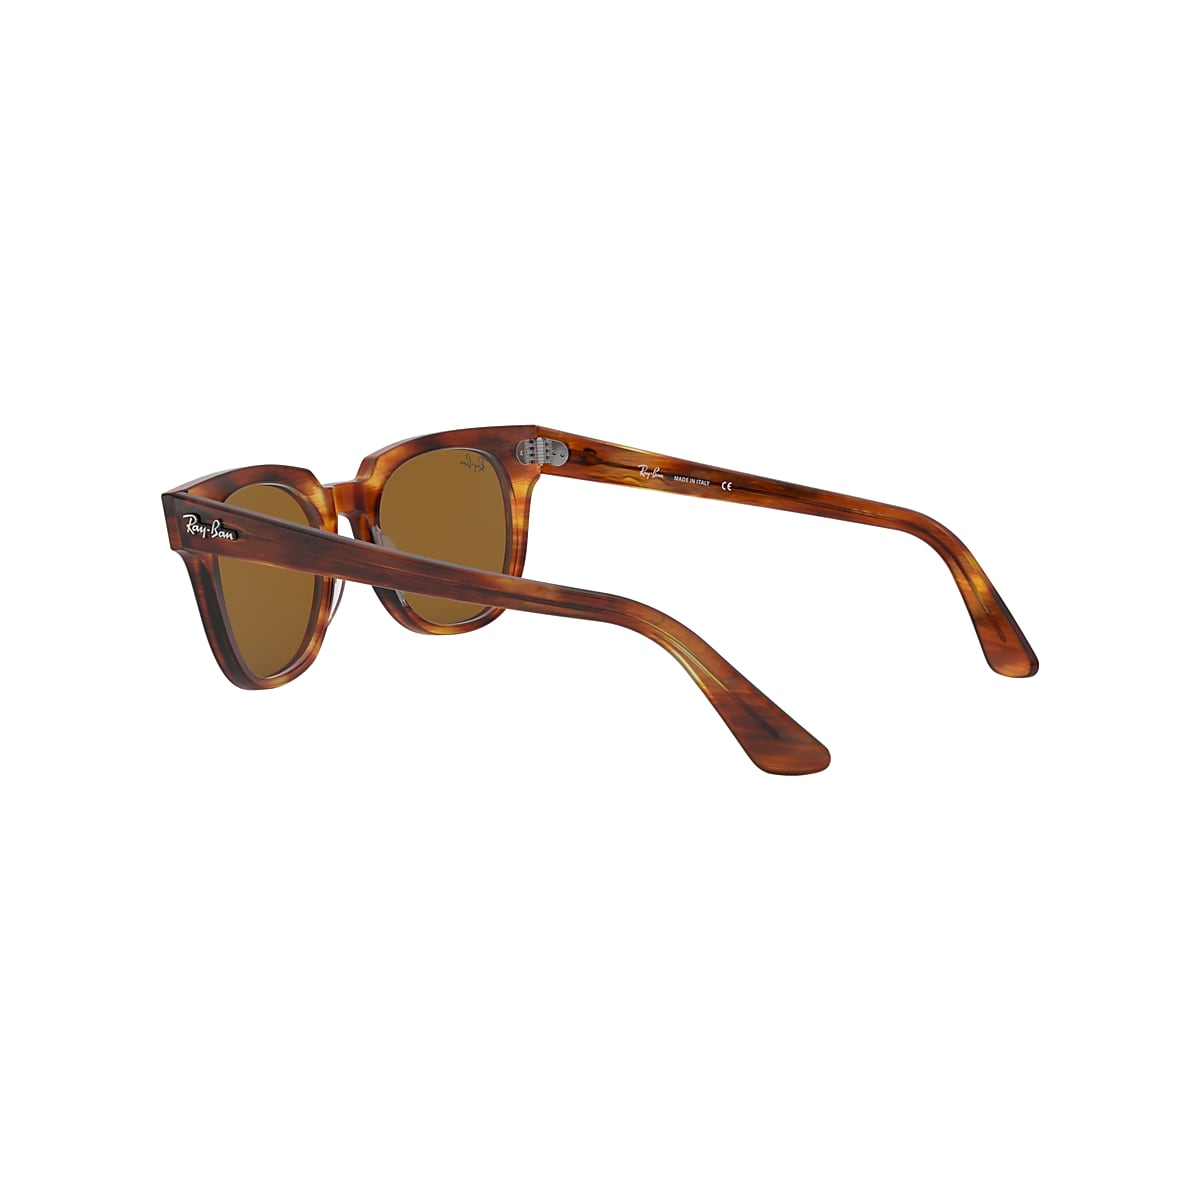 Check out the Meteor Classic at ray-ban.com